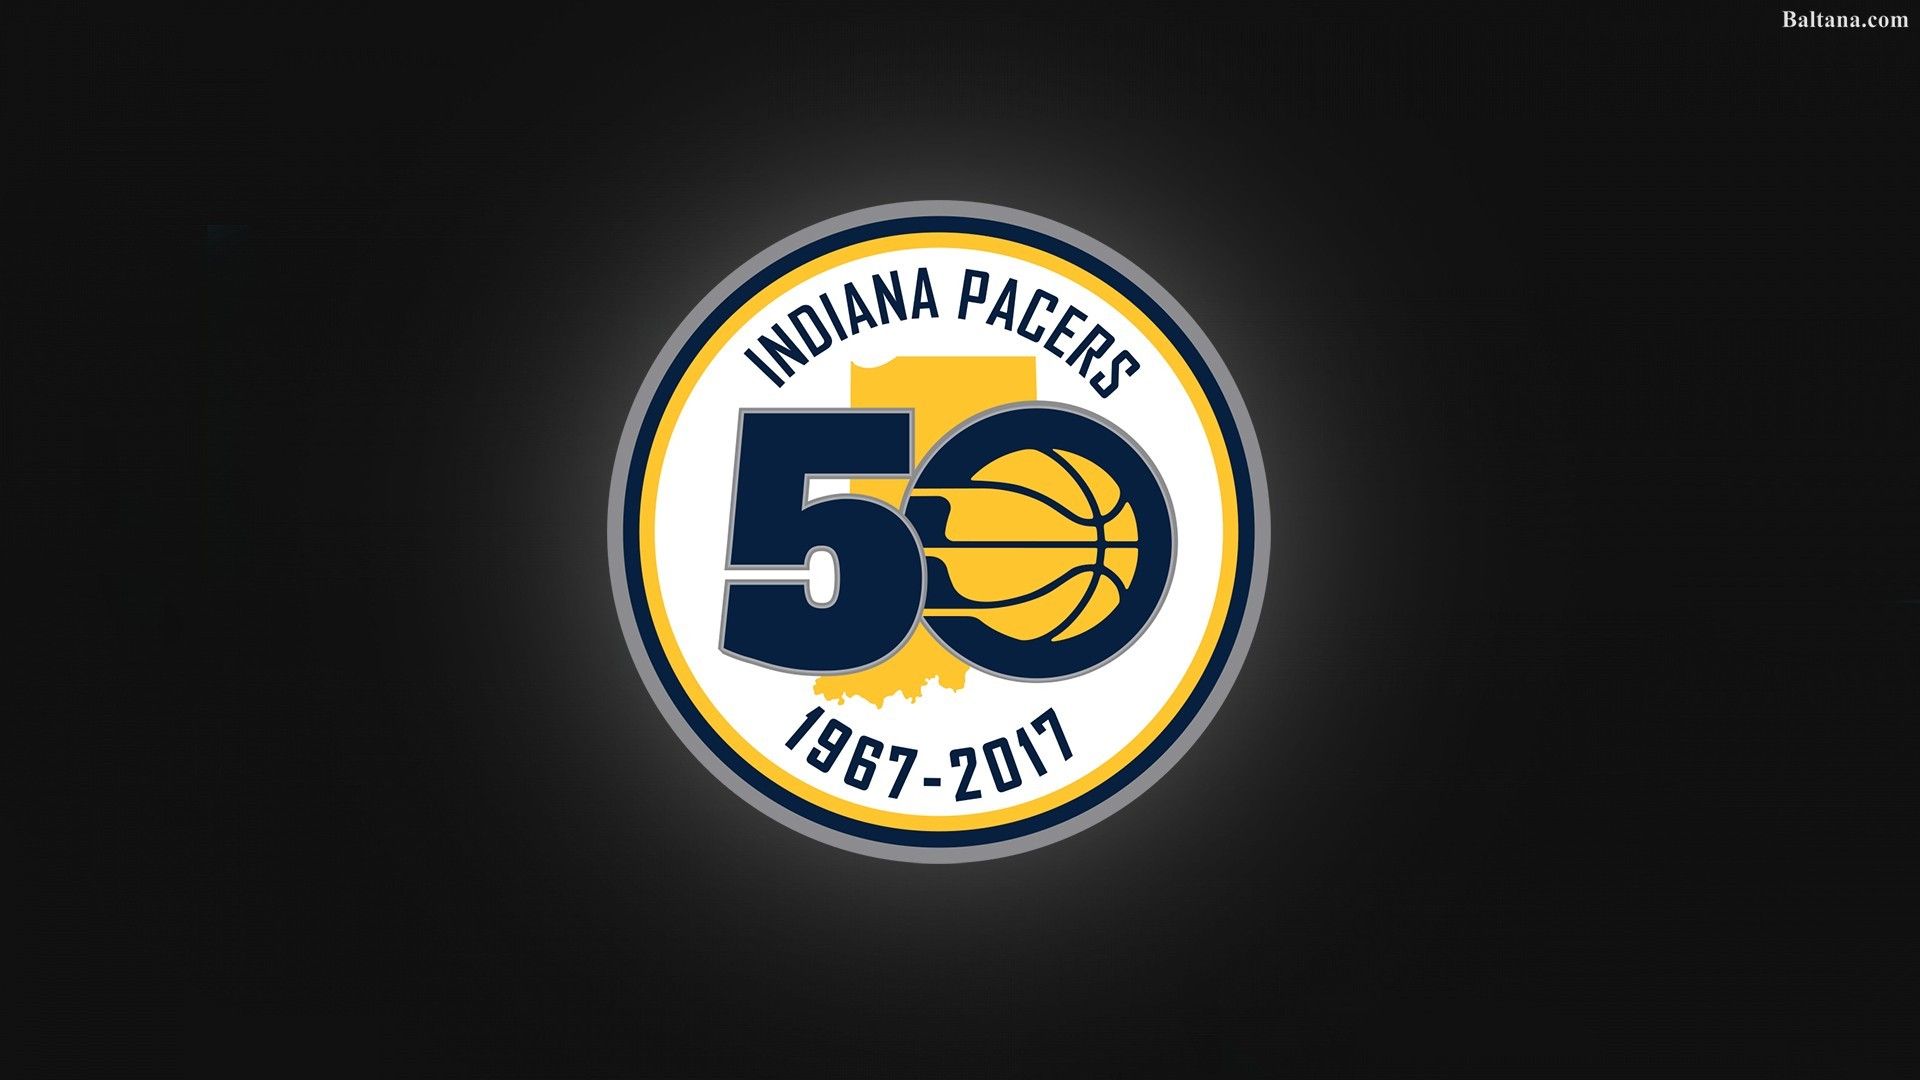 Pacers Wallpaper